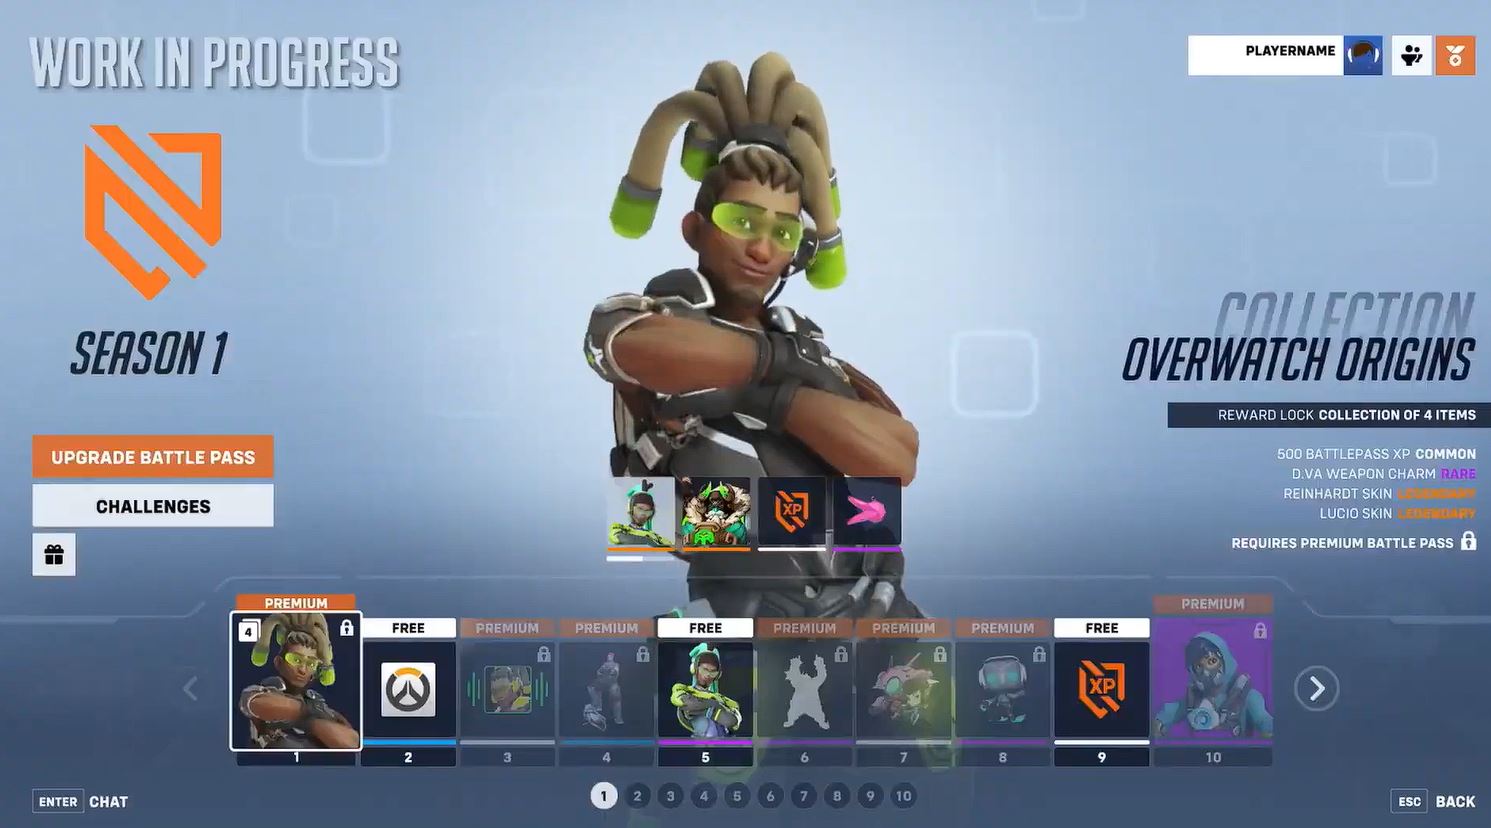 The battle pass design from Overwatch 2.